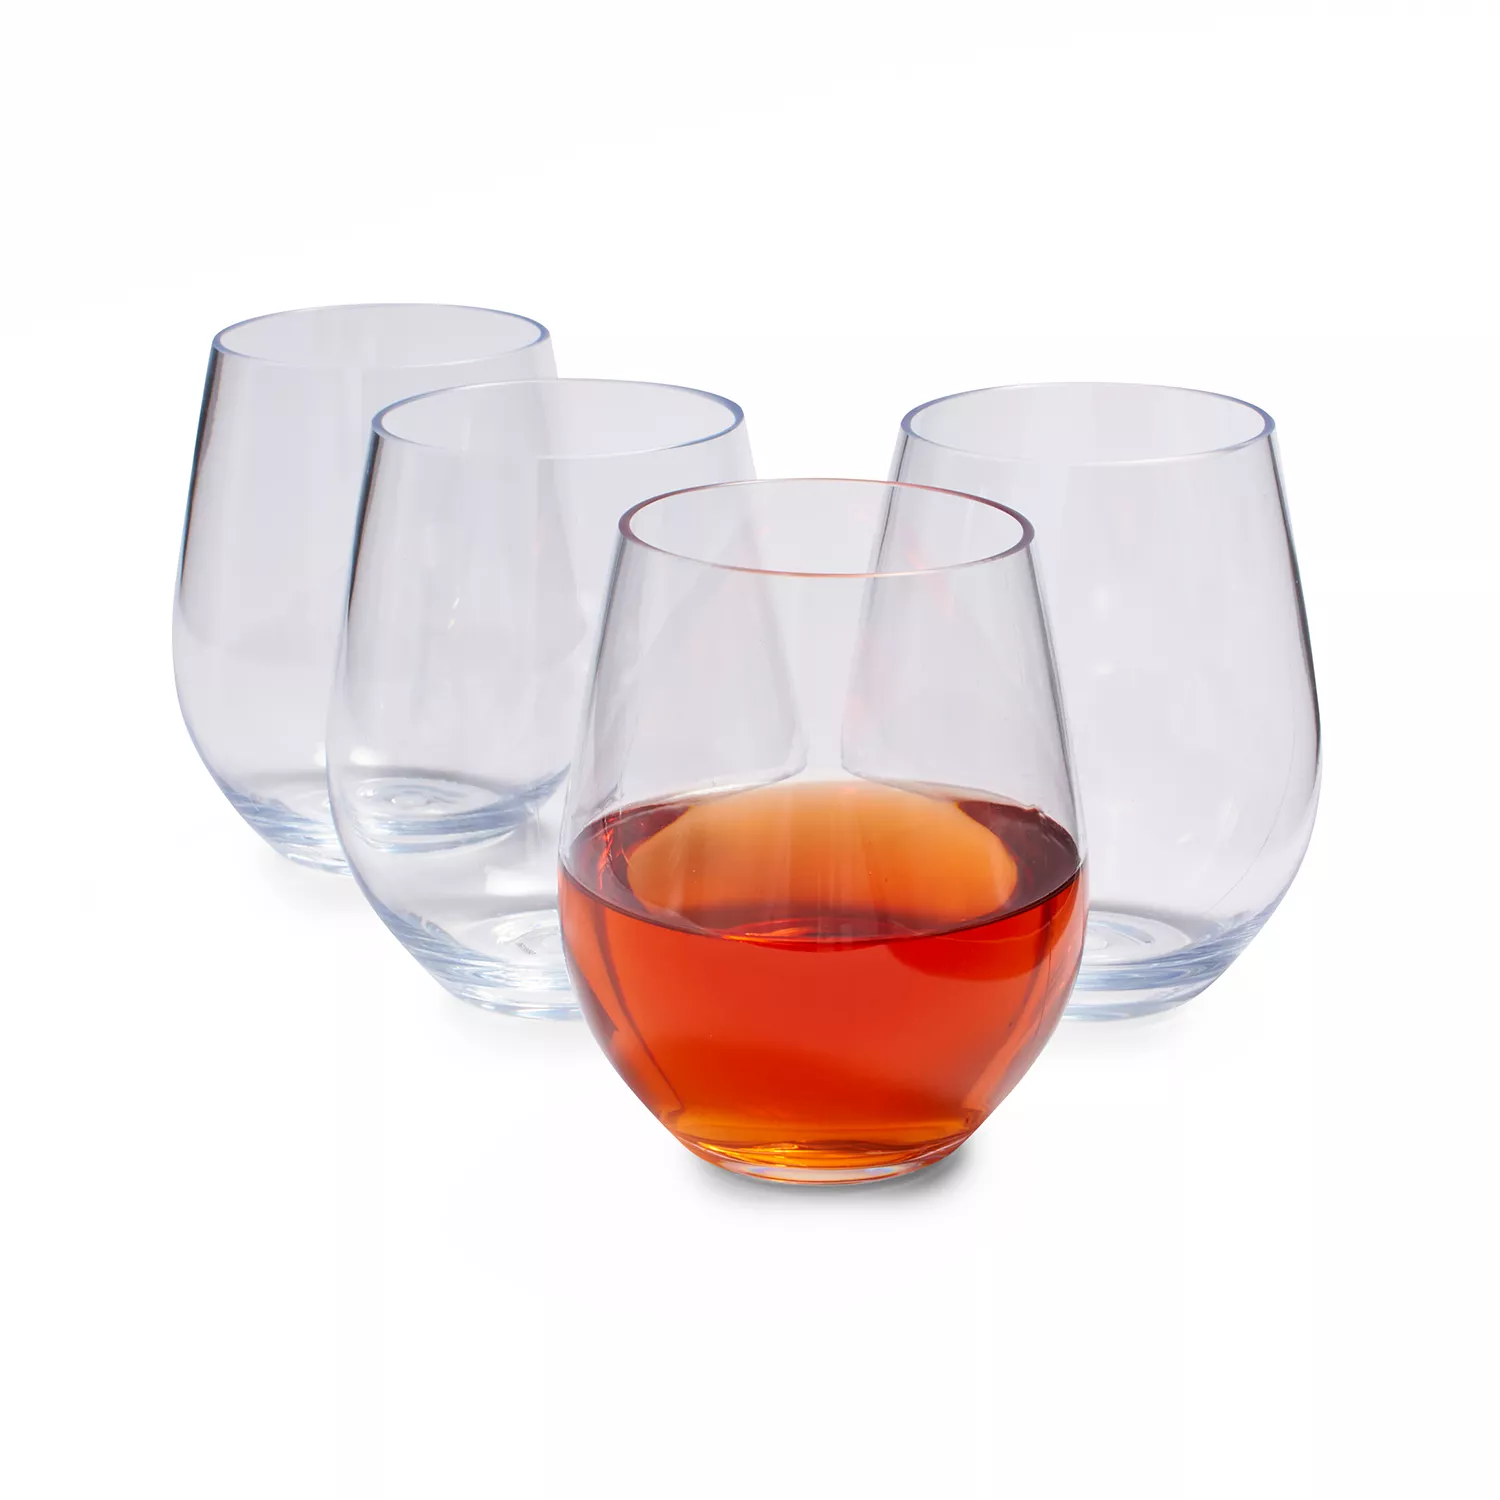 Wine Glasses Set Of 4 Assorted Colored Stemless Glasses 21 OZ. Original  Mason Large Wine Cup, Red an…See more Wine Glasses Set Of 4 Assorted  Colored